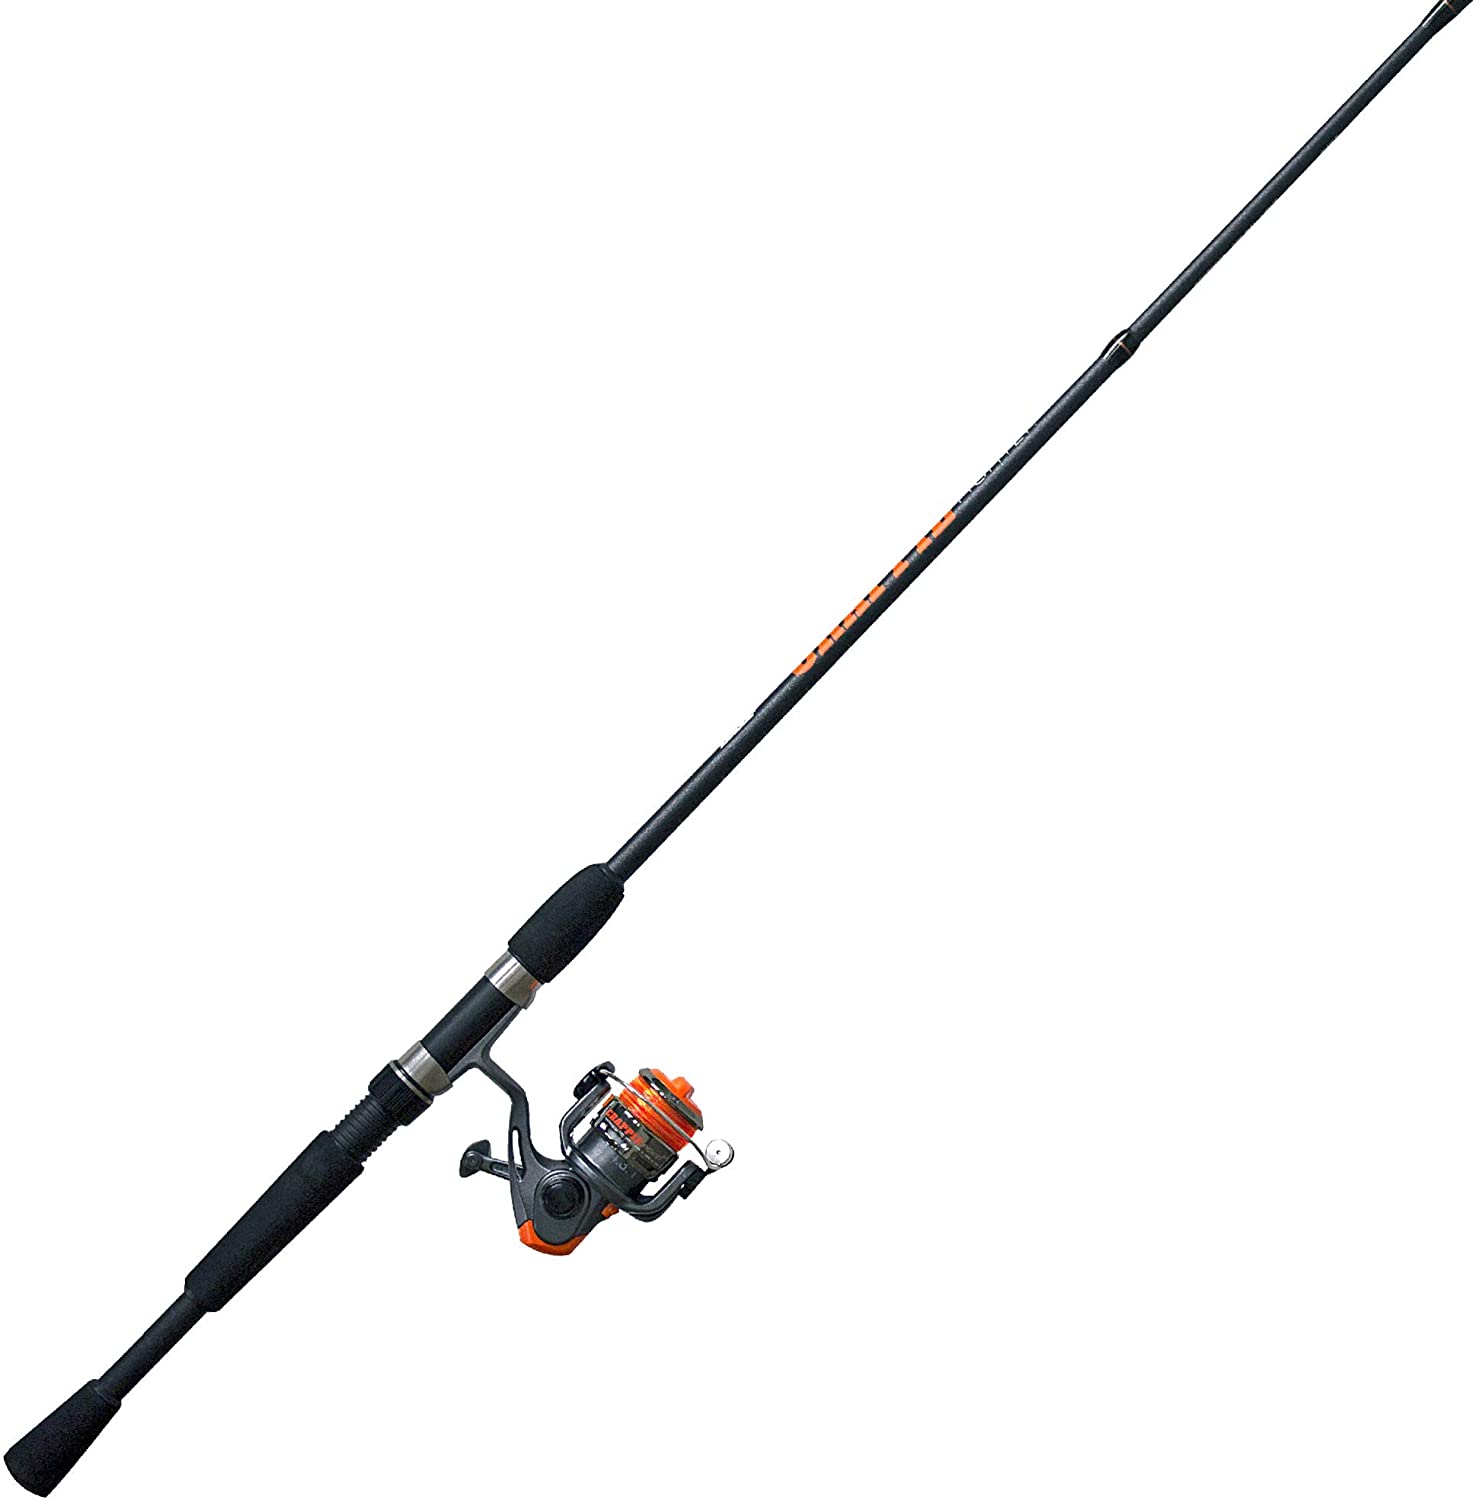 https://saffordtrading.com/wp-content/uploads/2022/01/Zebco-Crappie-Fighter-Spinning-Reel-and-Fishing-Rod-Combo-CRFTS602MLA.jpg